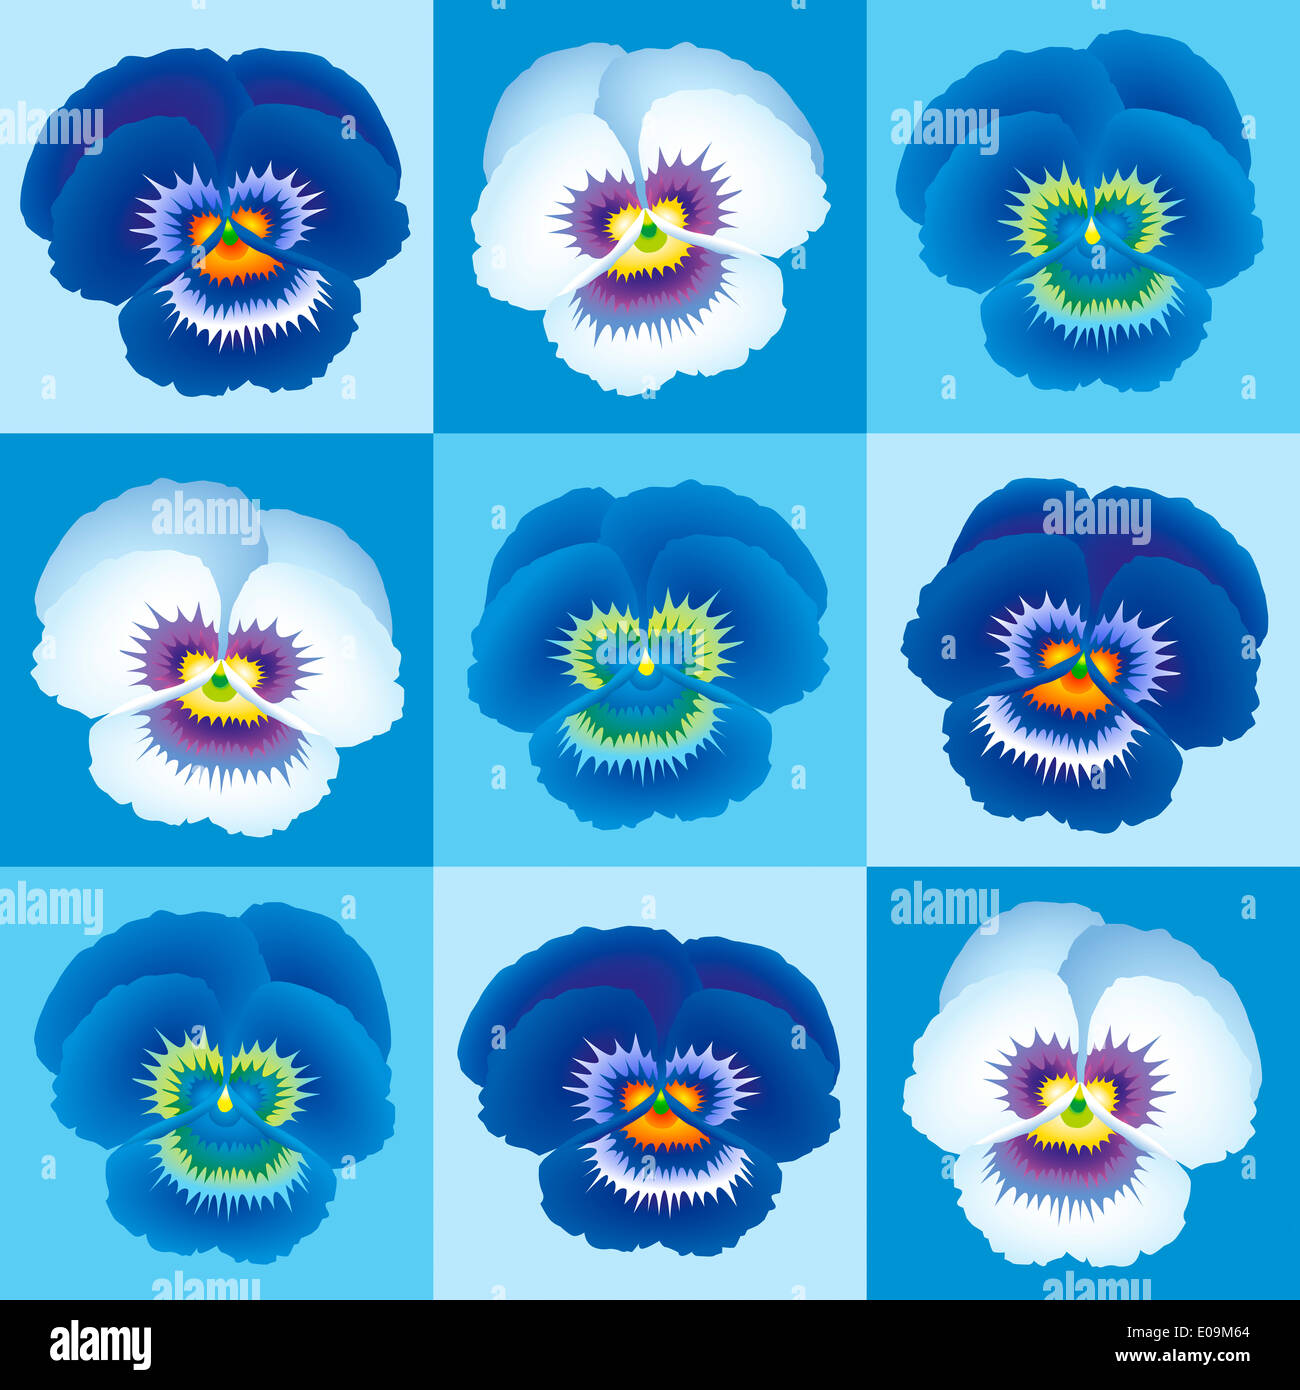 Blue pansy wallpaper - seamless background can be created. Stock Photo